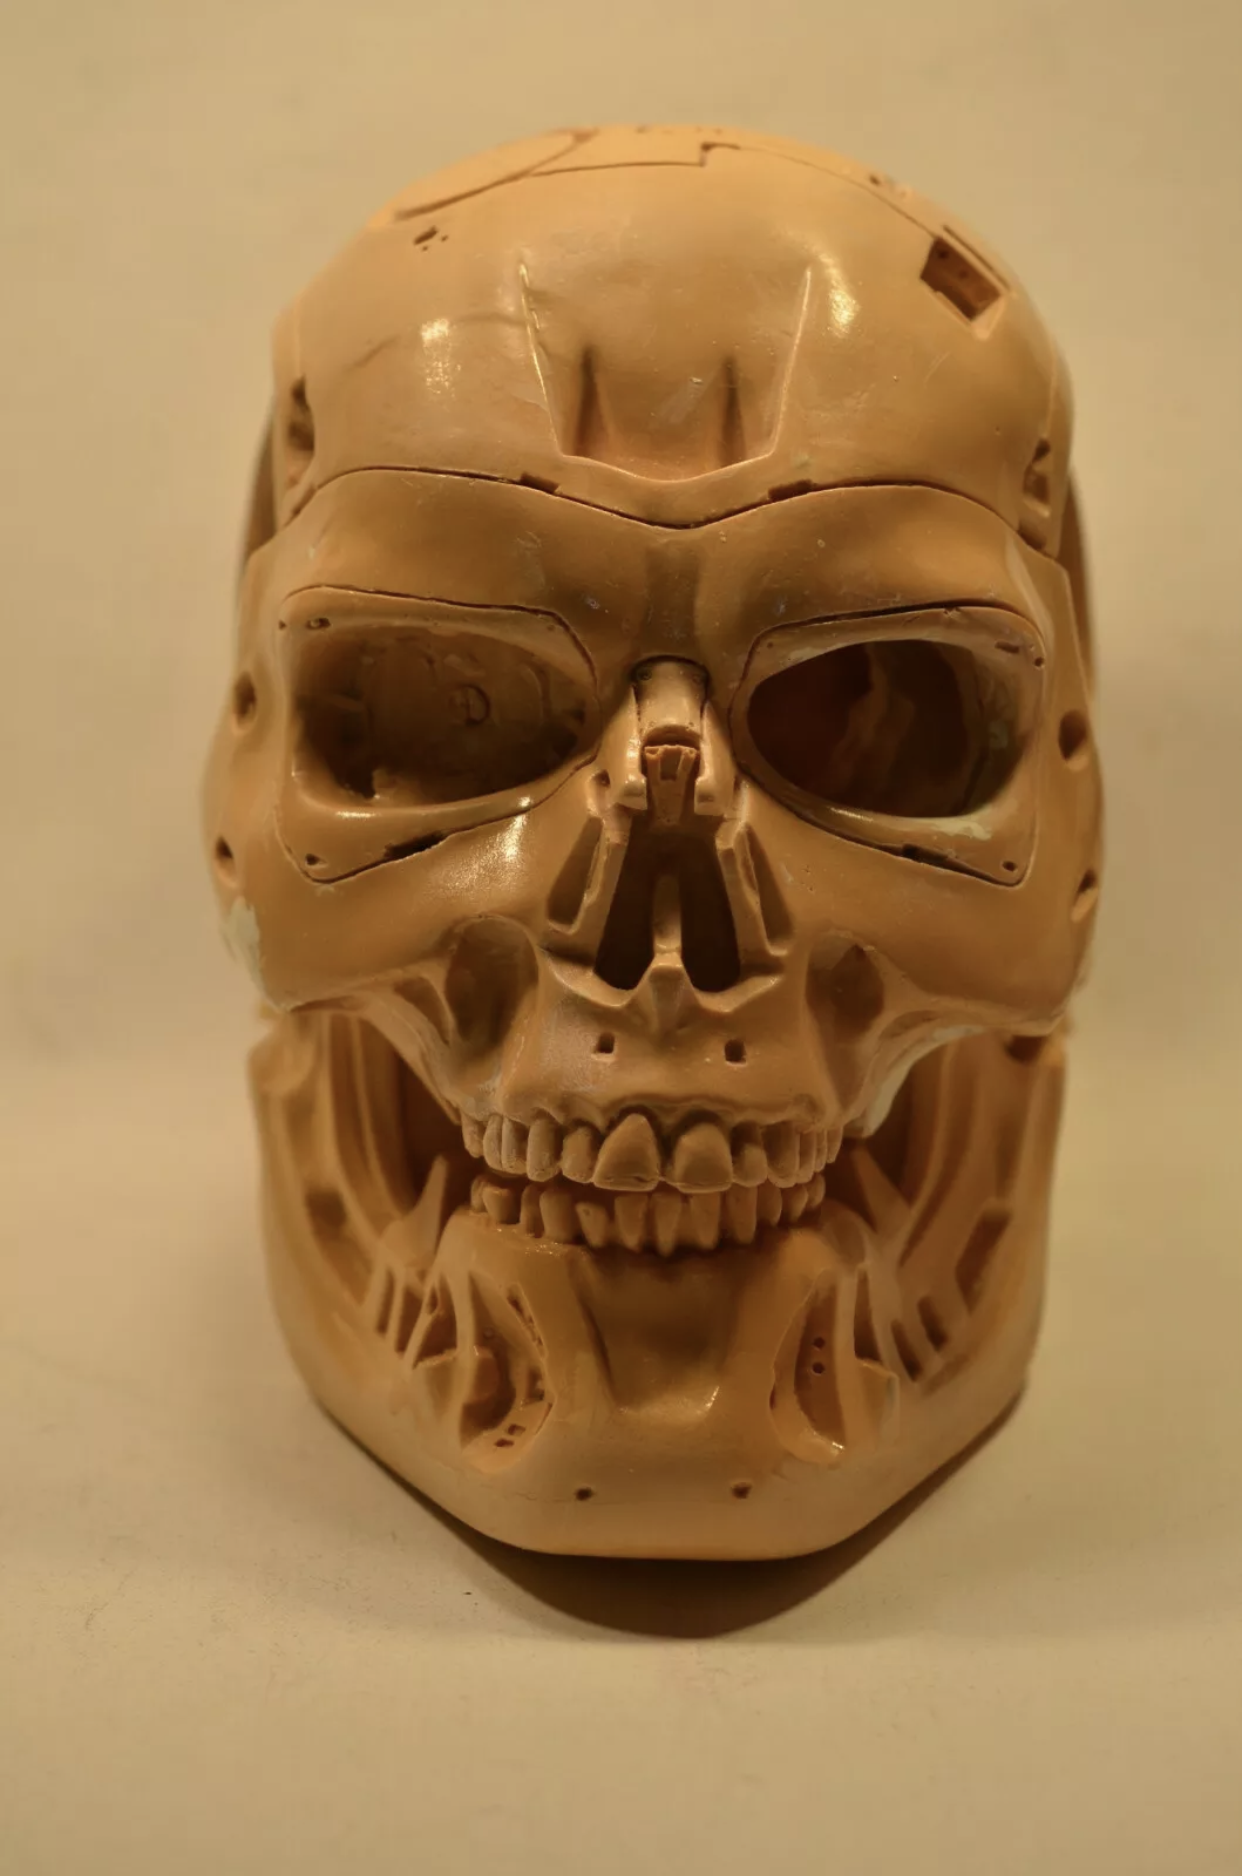 Endo Skull - Unknown - 01 - 001 - Posted by Gizmo.png